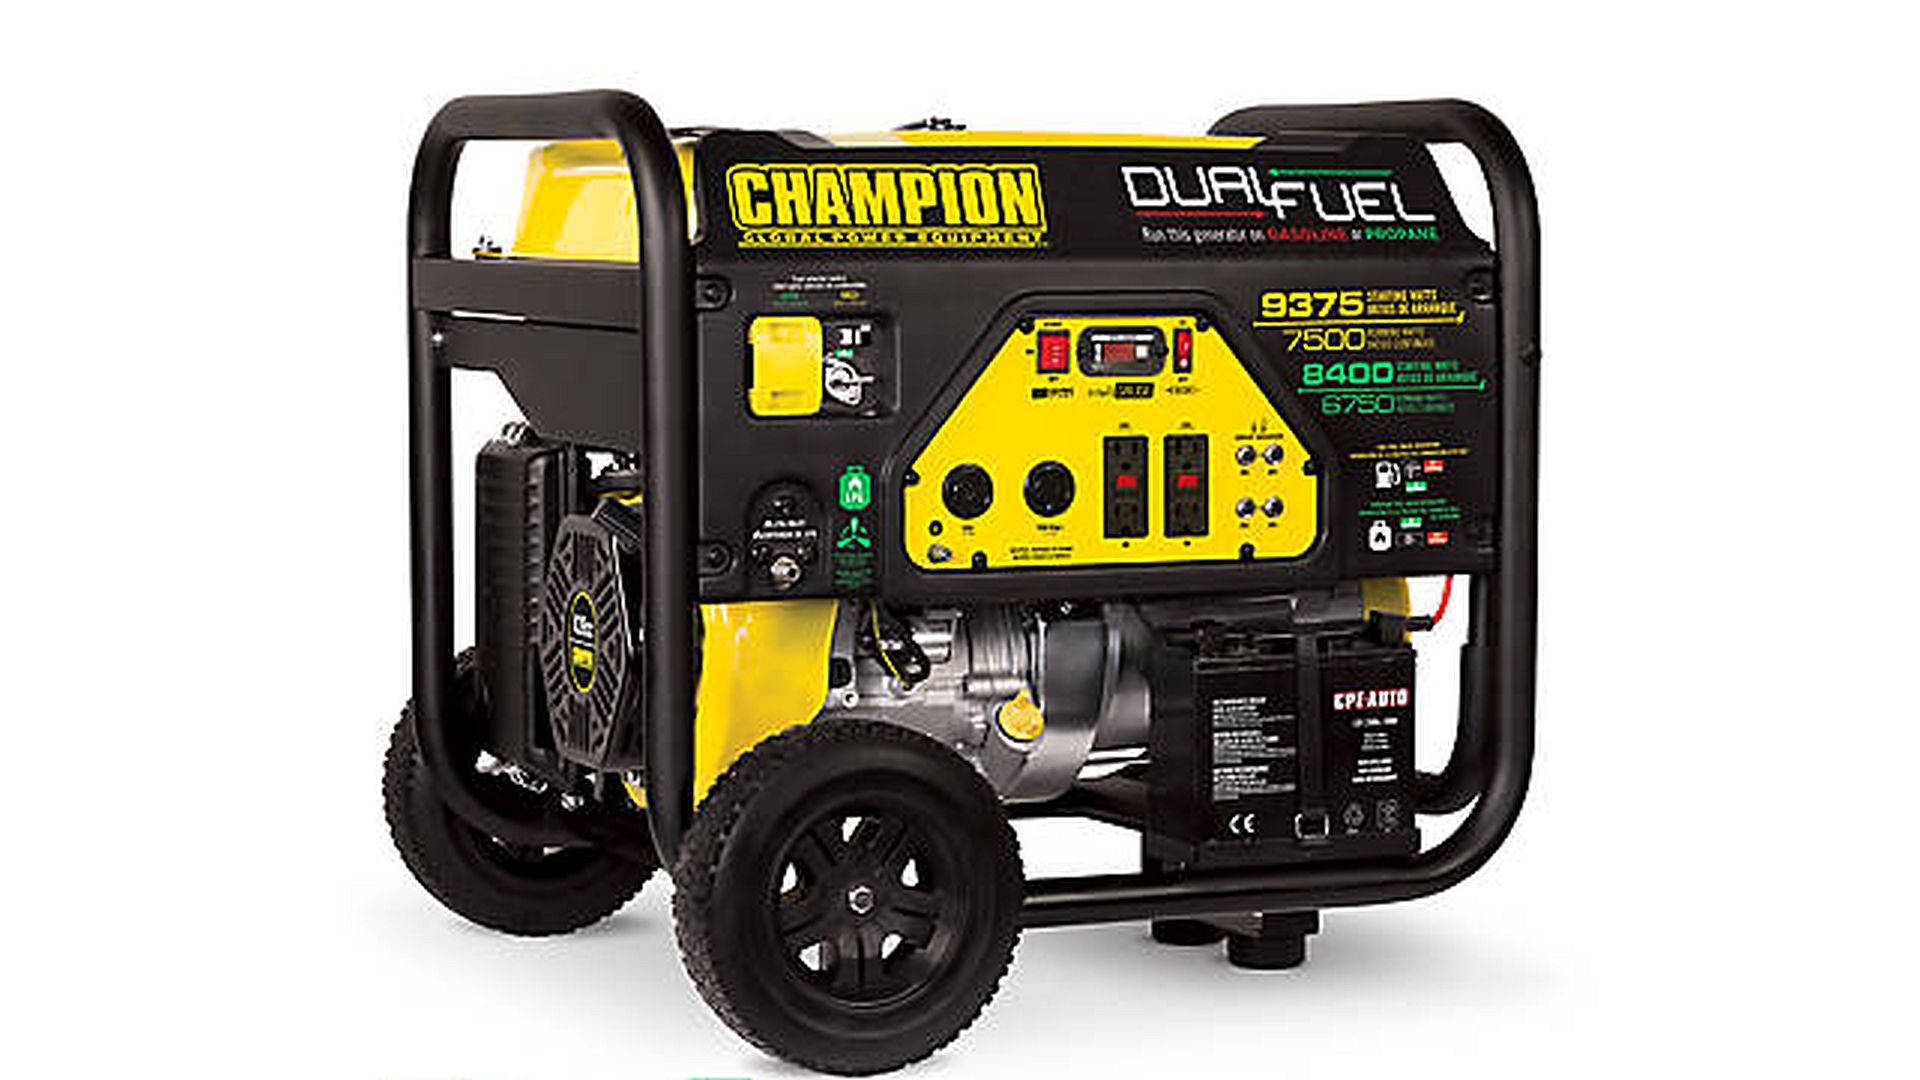 Champion 7500W Dual Fuel Portable Generator Review